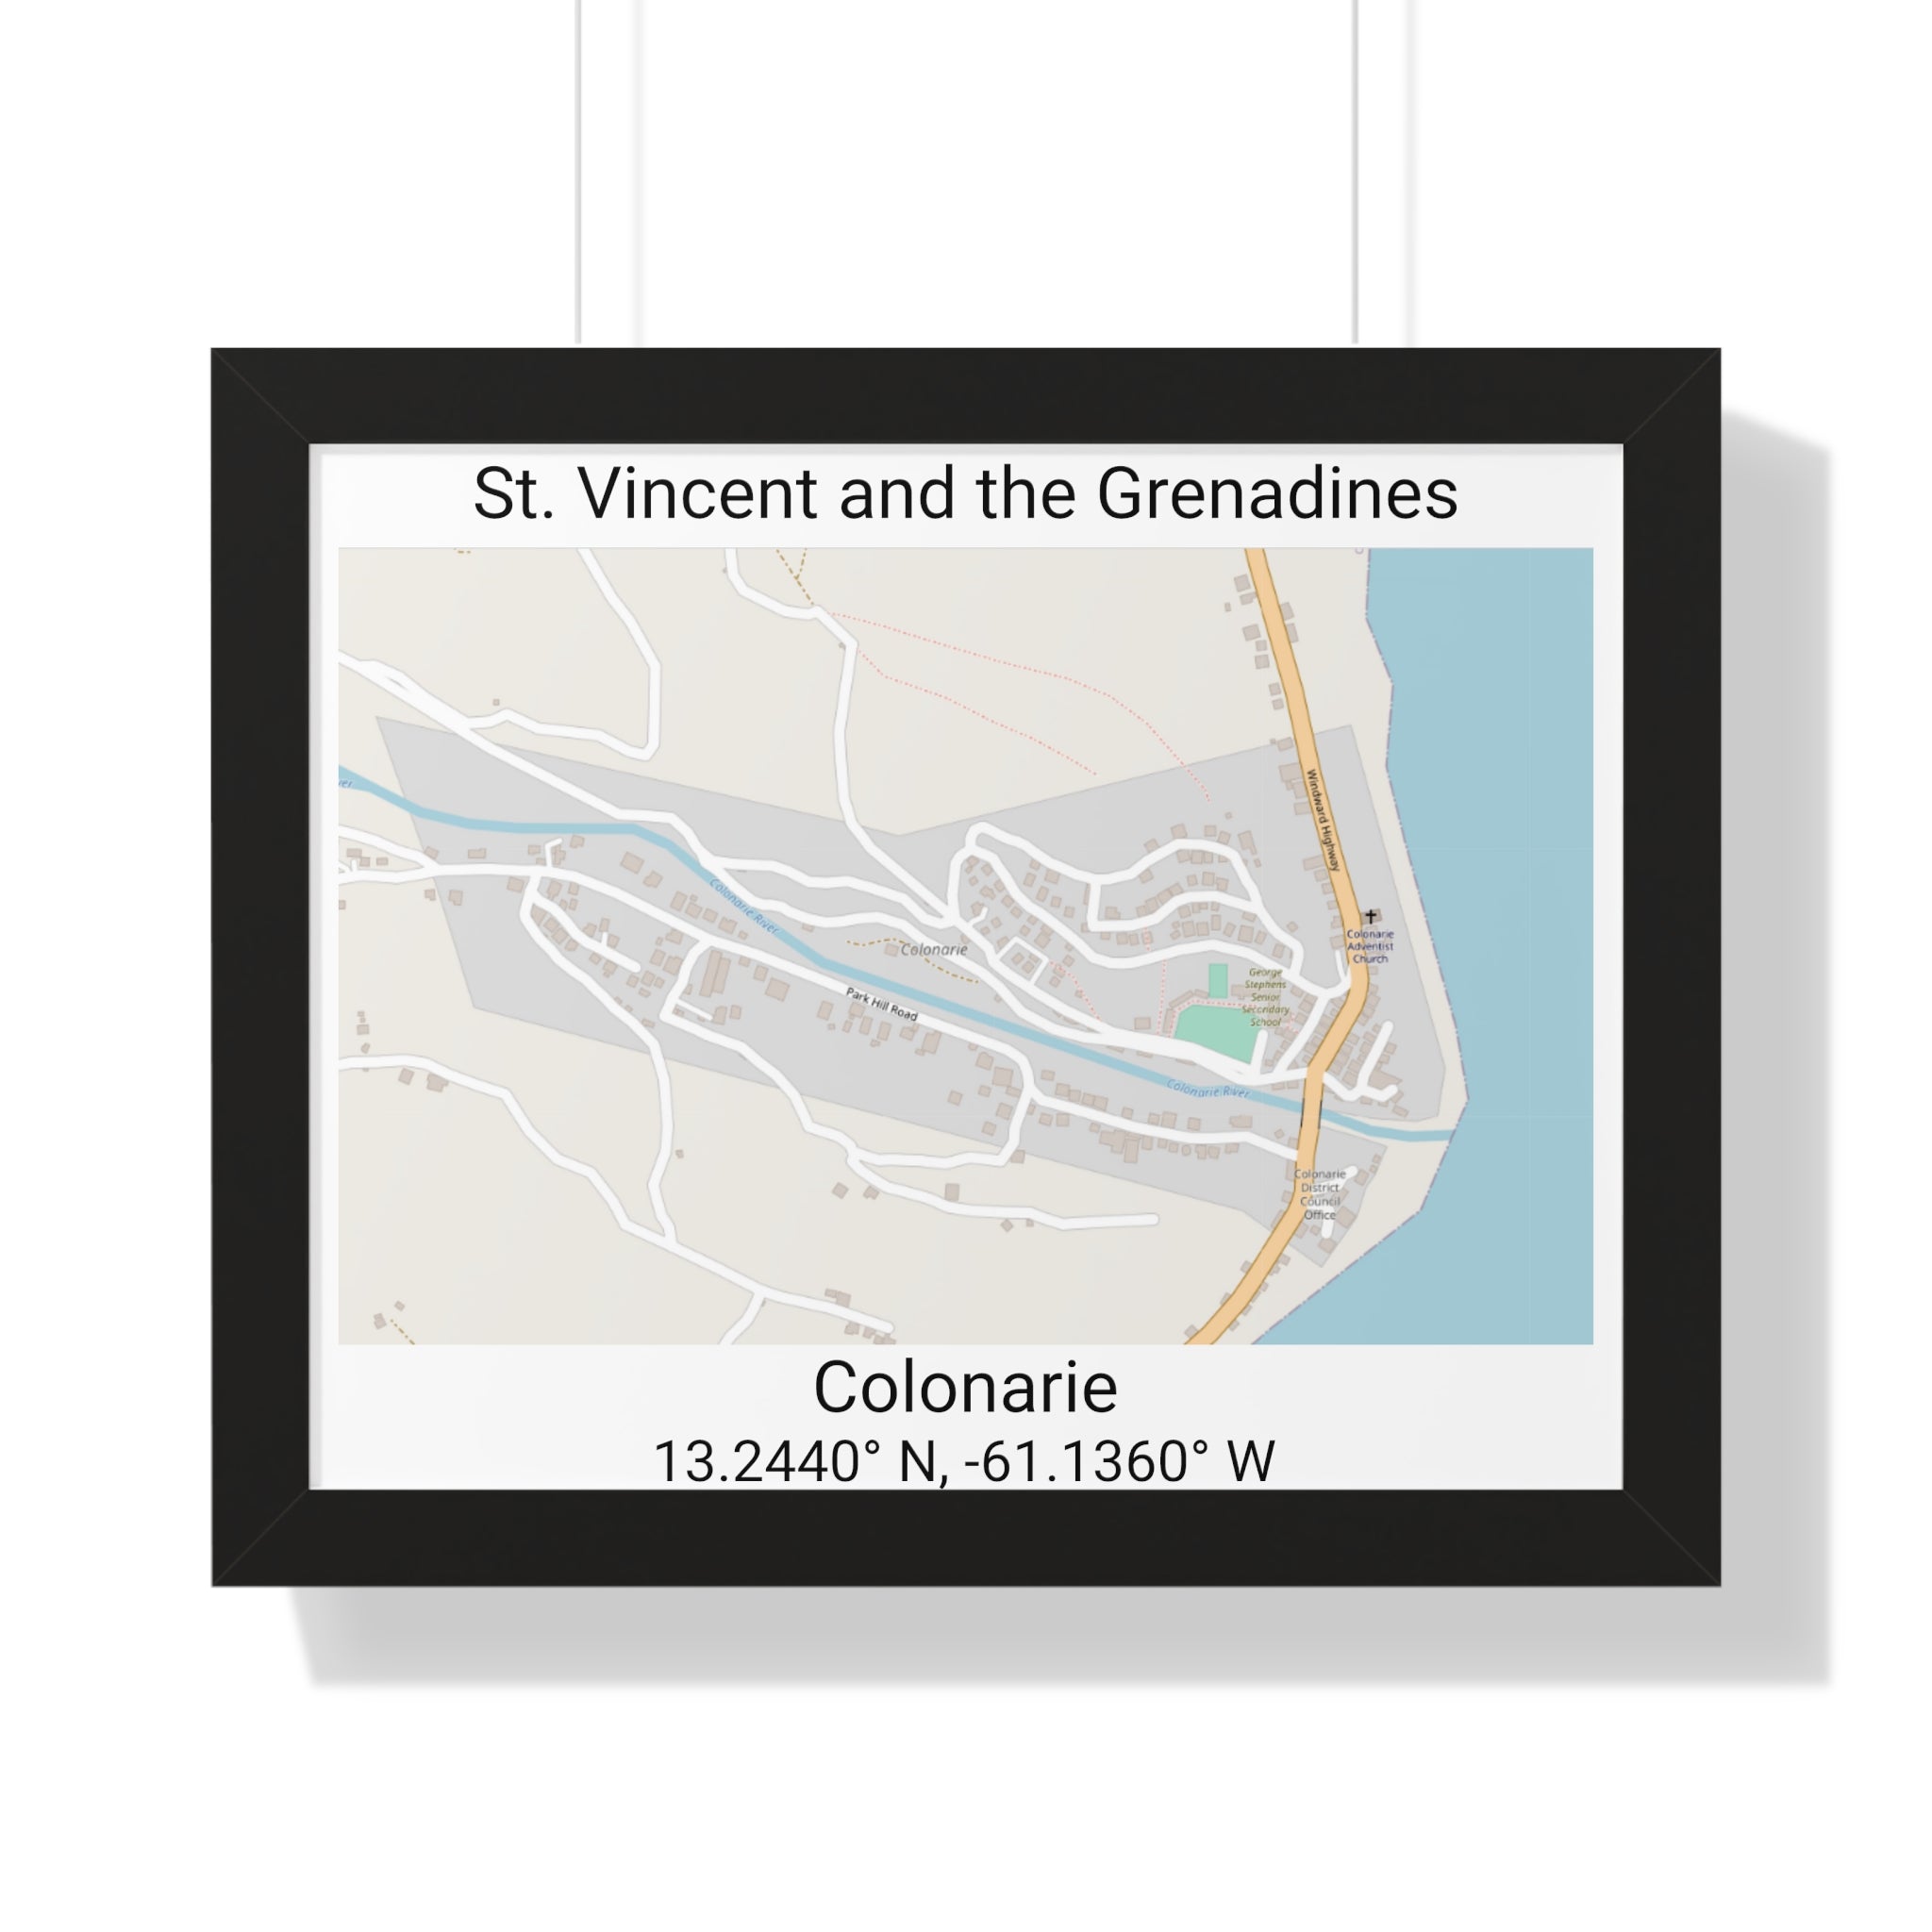 Colonarie St. Vincent and the Grenadines Map Framed Print Poster, City Map Print Poster. Village Map Print Poster, Road Map Print Poster, Framed Vertical Poster Framed Horizontal Poster